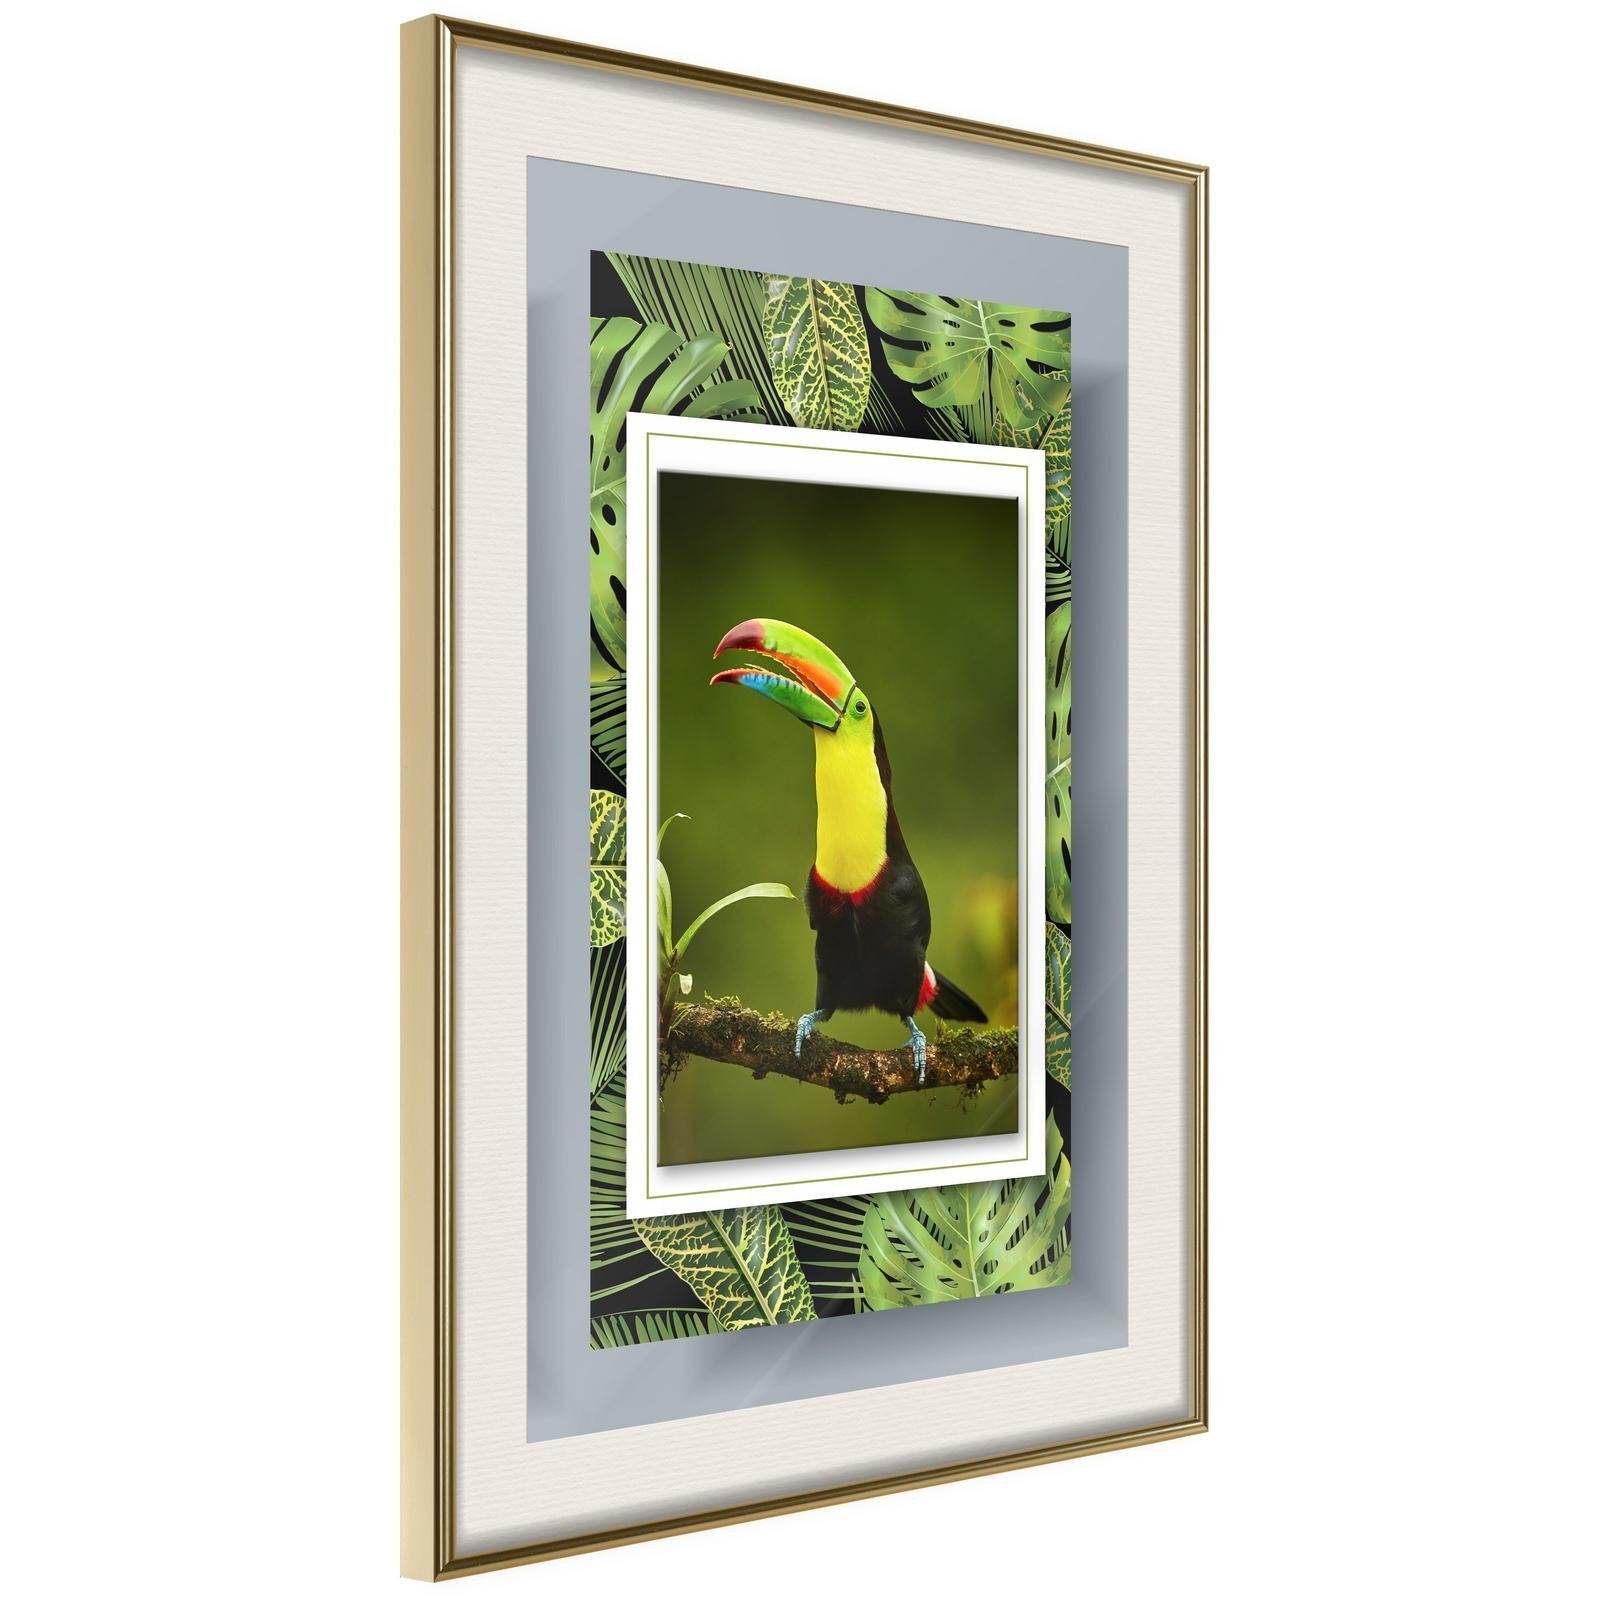 Inramad Poster / Tavla - Toucan in the Frame-Poster Inramad-Artgeist-20x30-Guldram med passepartout-peaceofhome.se